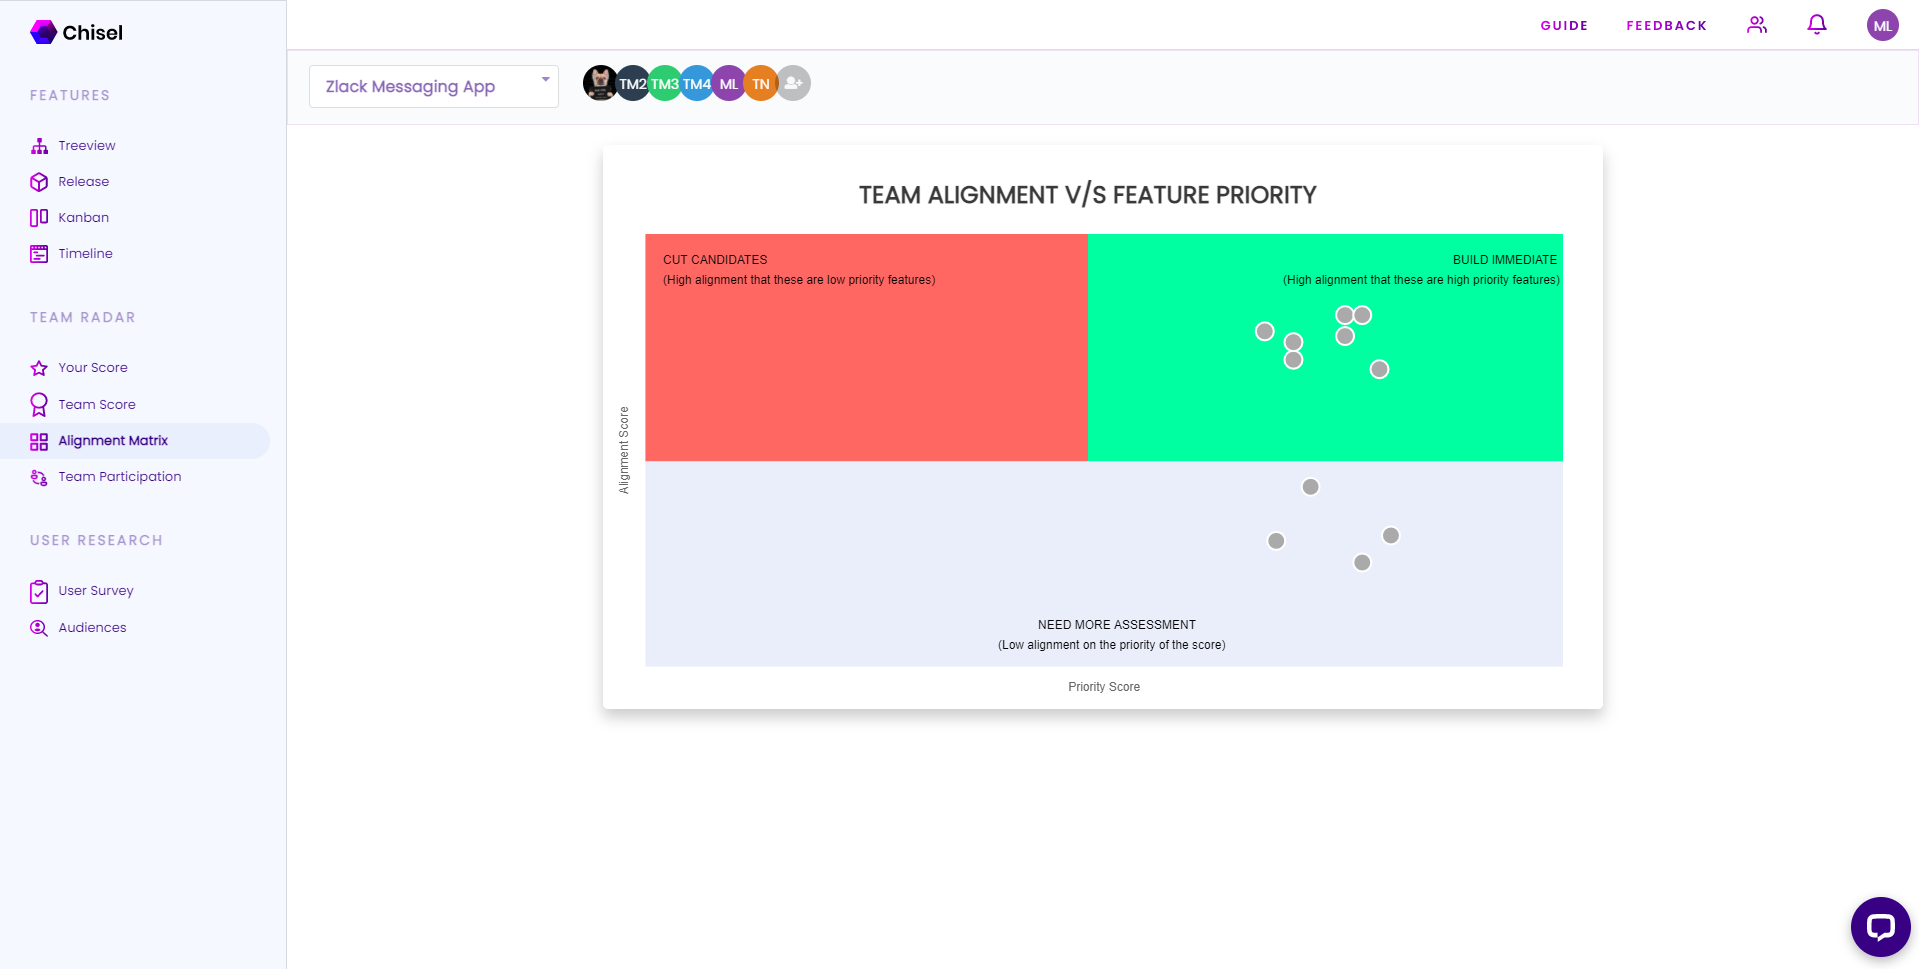 See how well your team is aligned with our alignment matrix